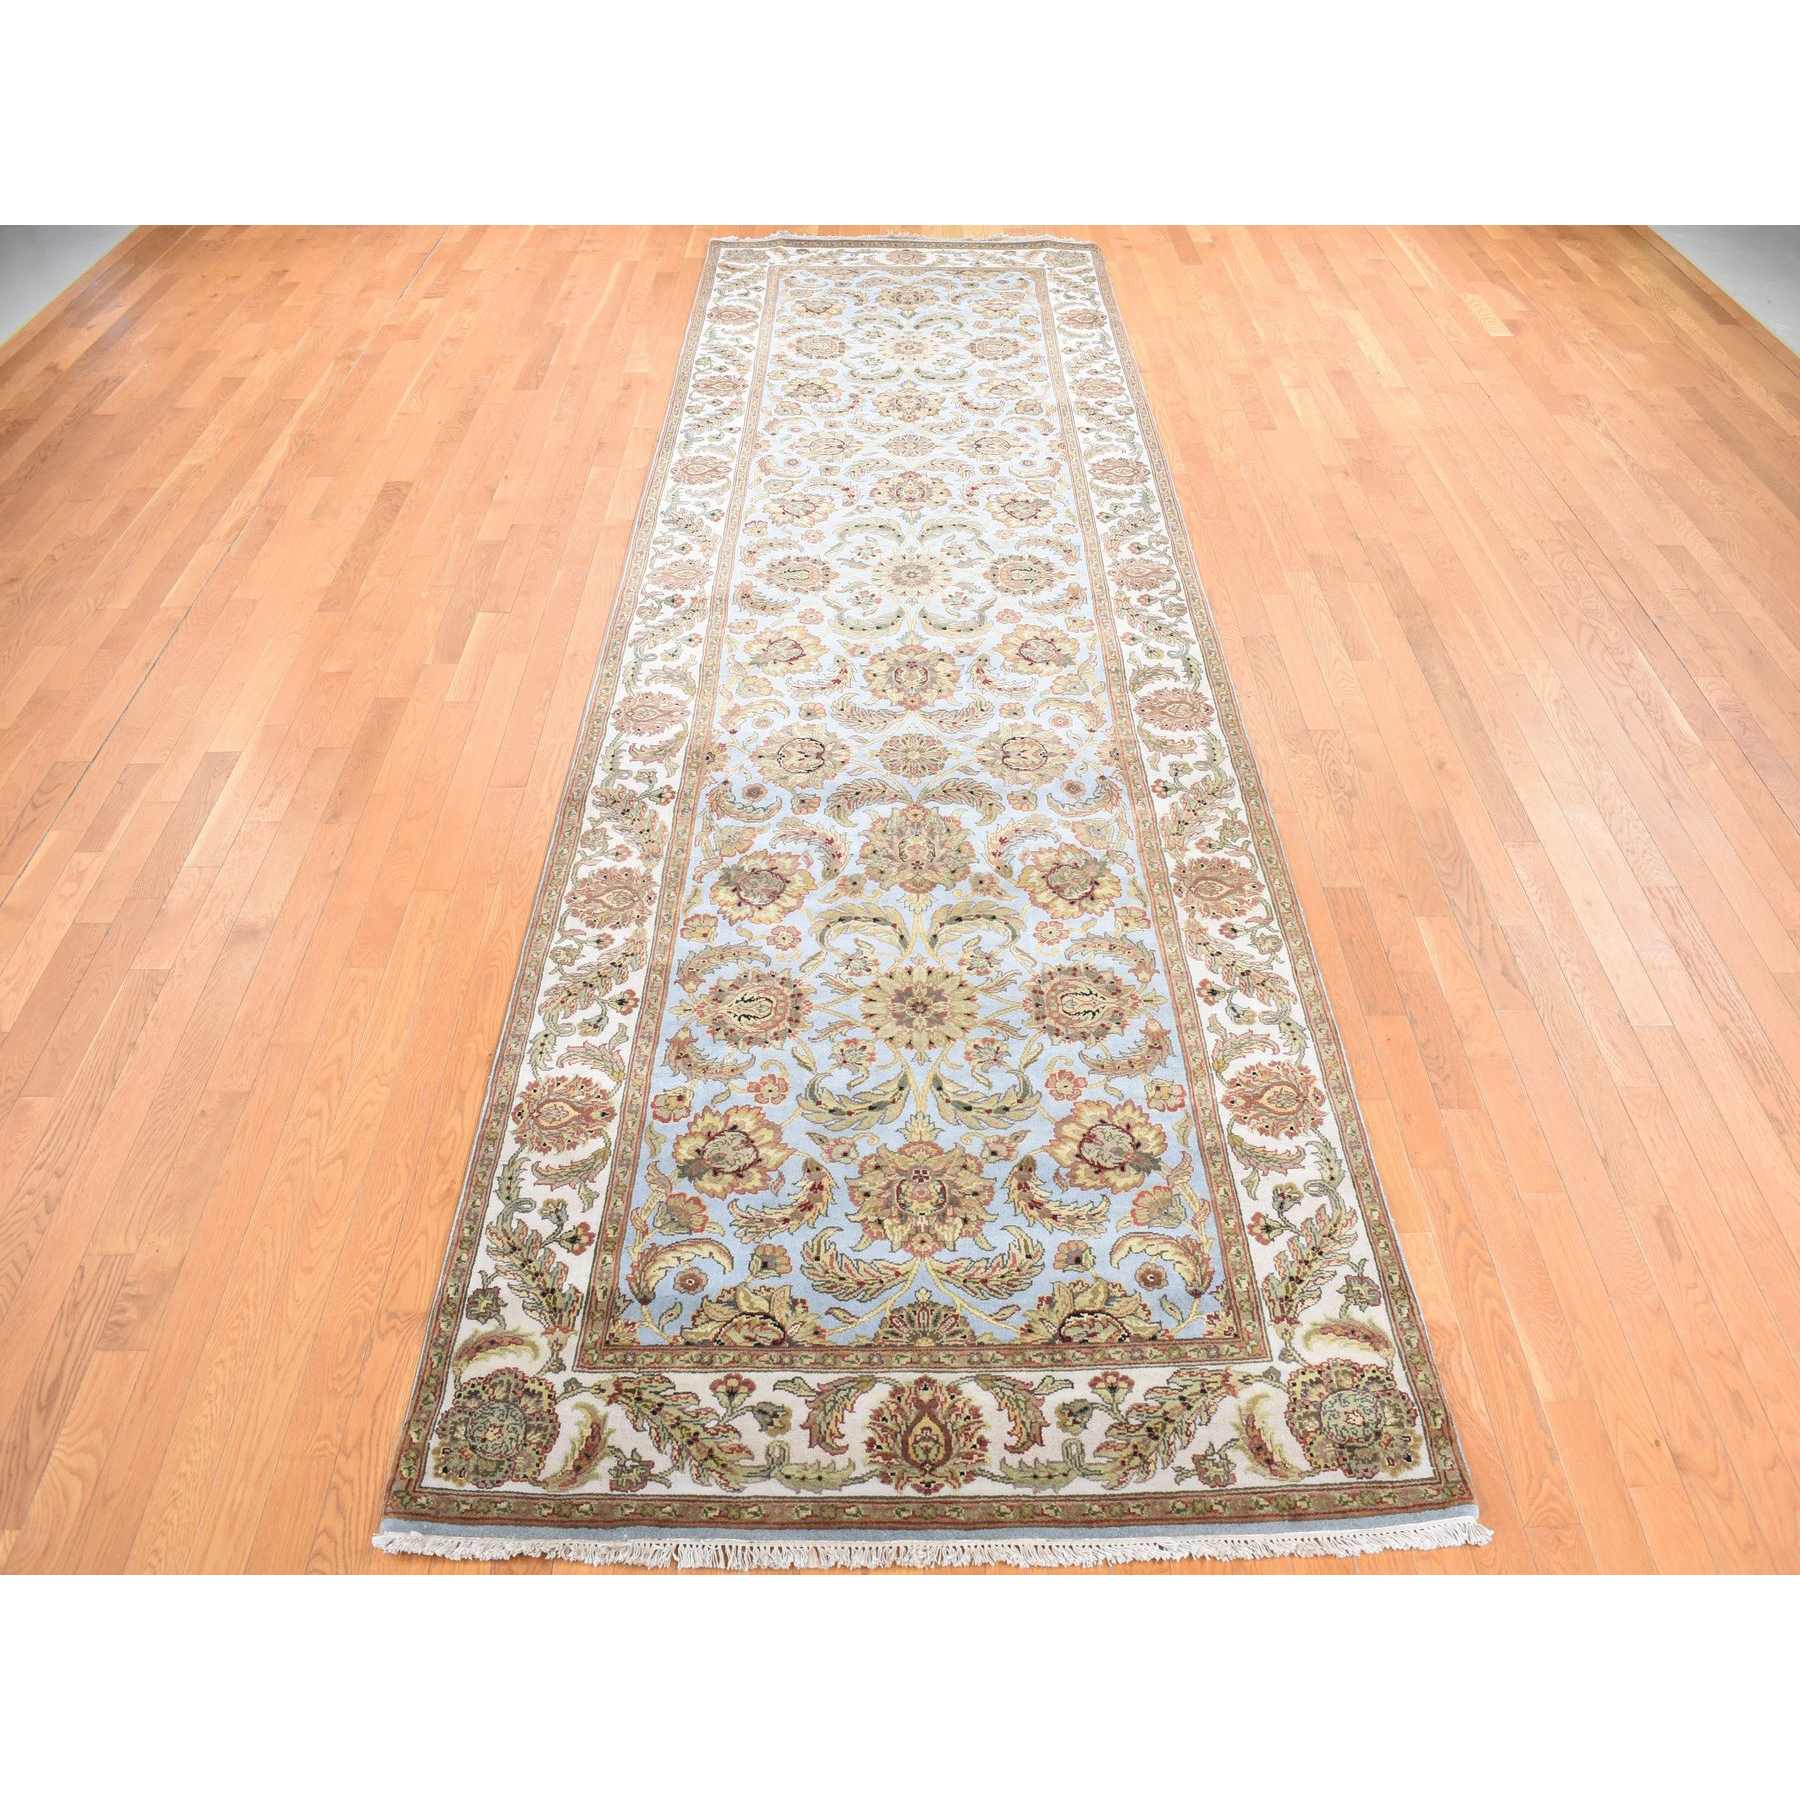 Rajasthan-Hand-Knotted-Rug-439915